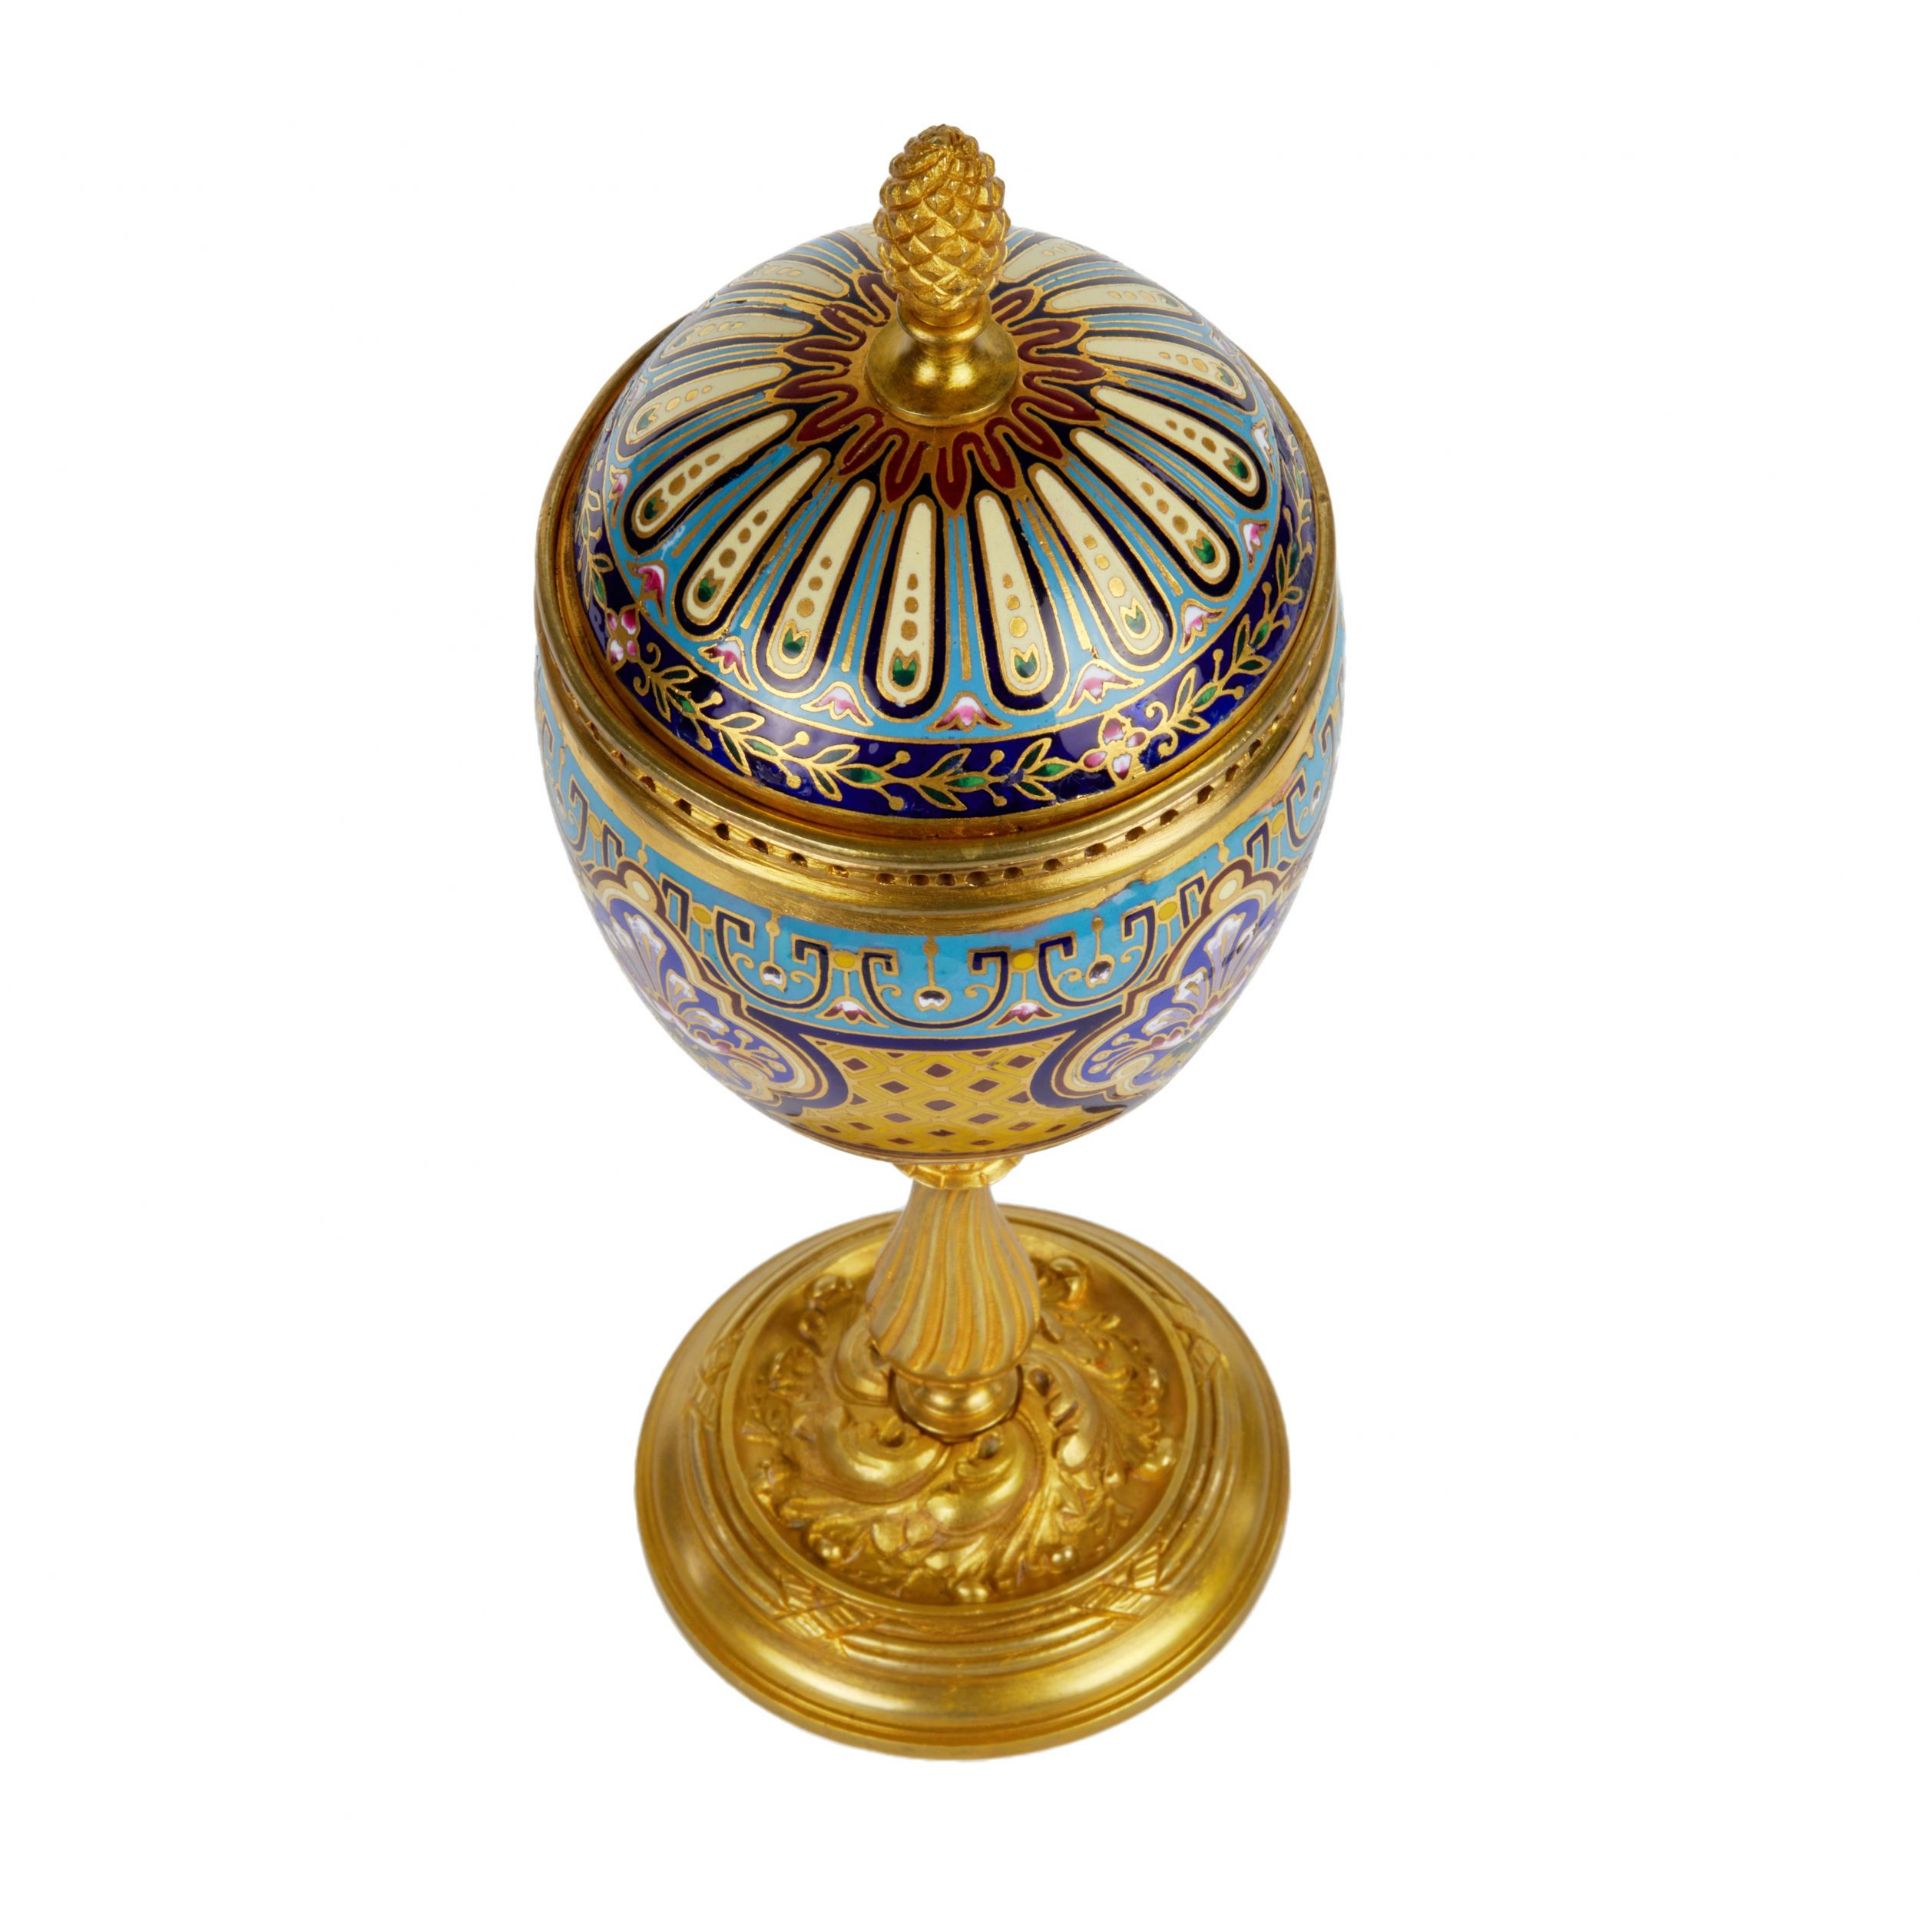 French goblet in bronze with enamel design. 19th century. - Image 3 of 5